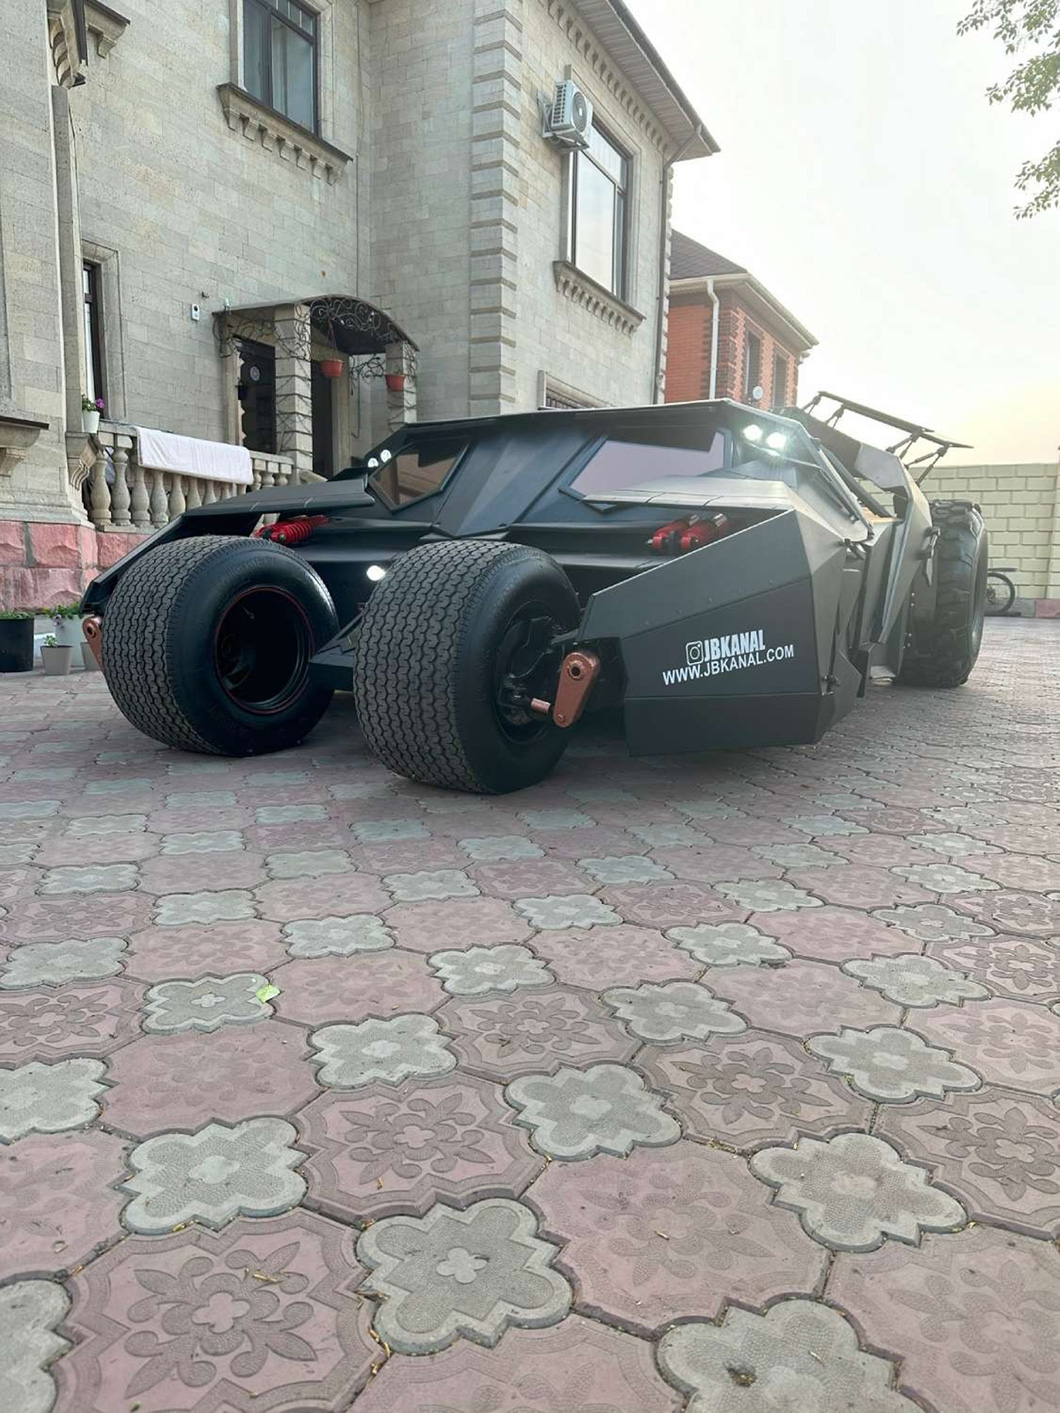 The most unusual thing about the car are its wheels.  The wheels look huge, so few would expect the wheel size to be only 15 inches - Photo: jb_kanal